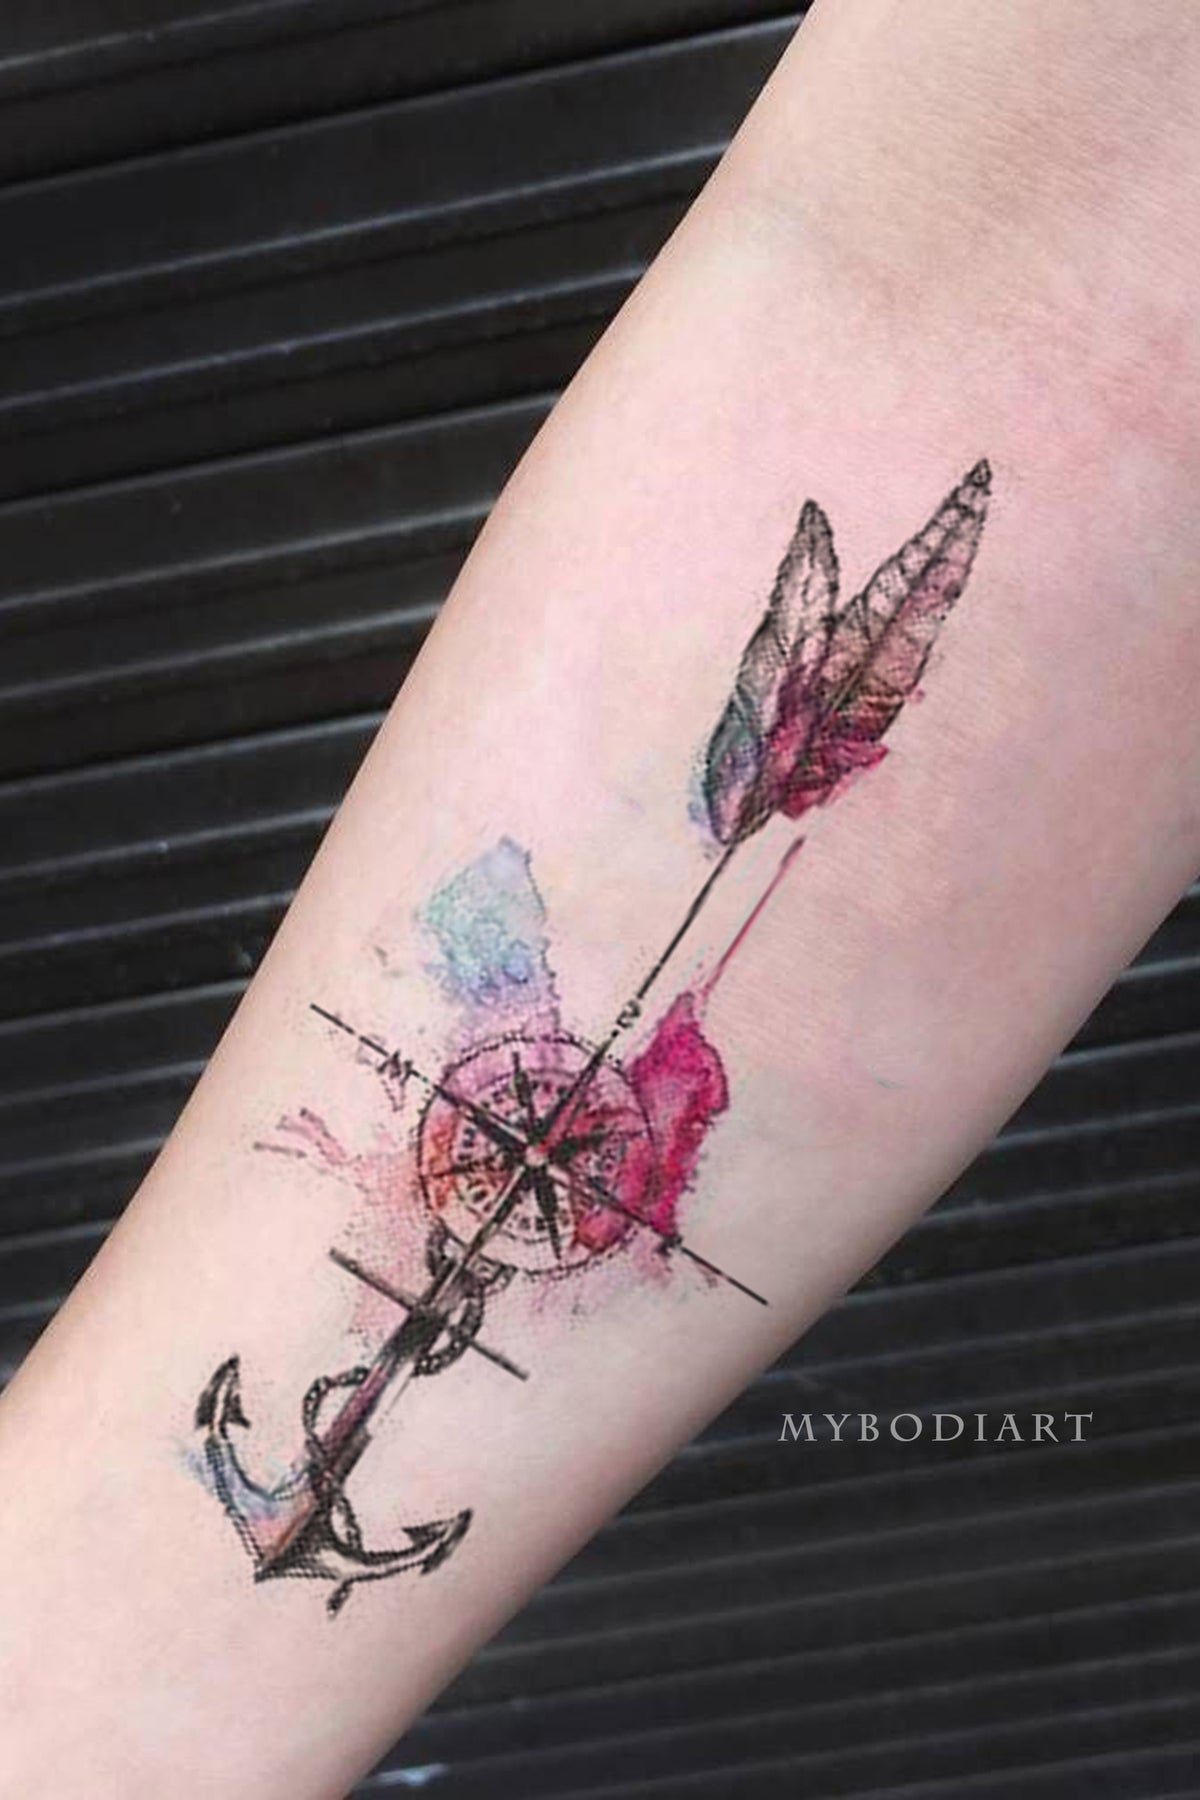 Find 100 Beautiful Feather Tattoo Ideas To Get Inspired  Feather tattoo  design Butterfly tattoos for women Cool wrist tattoos